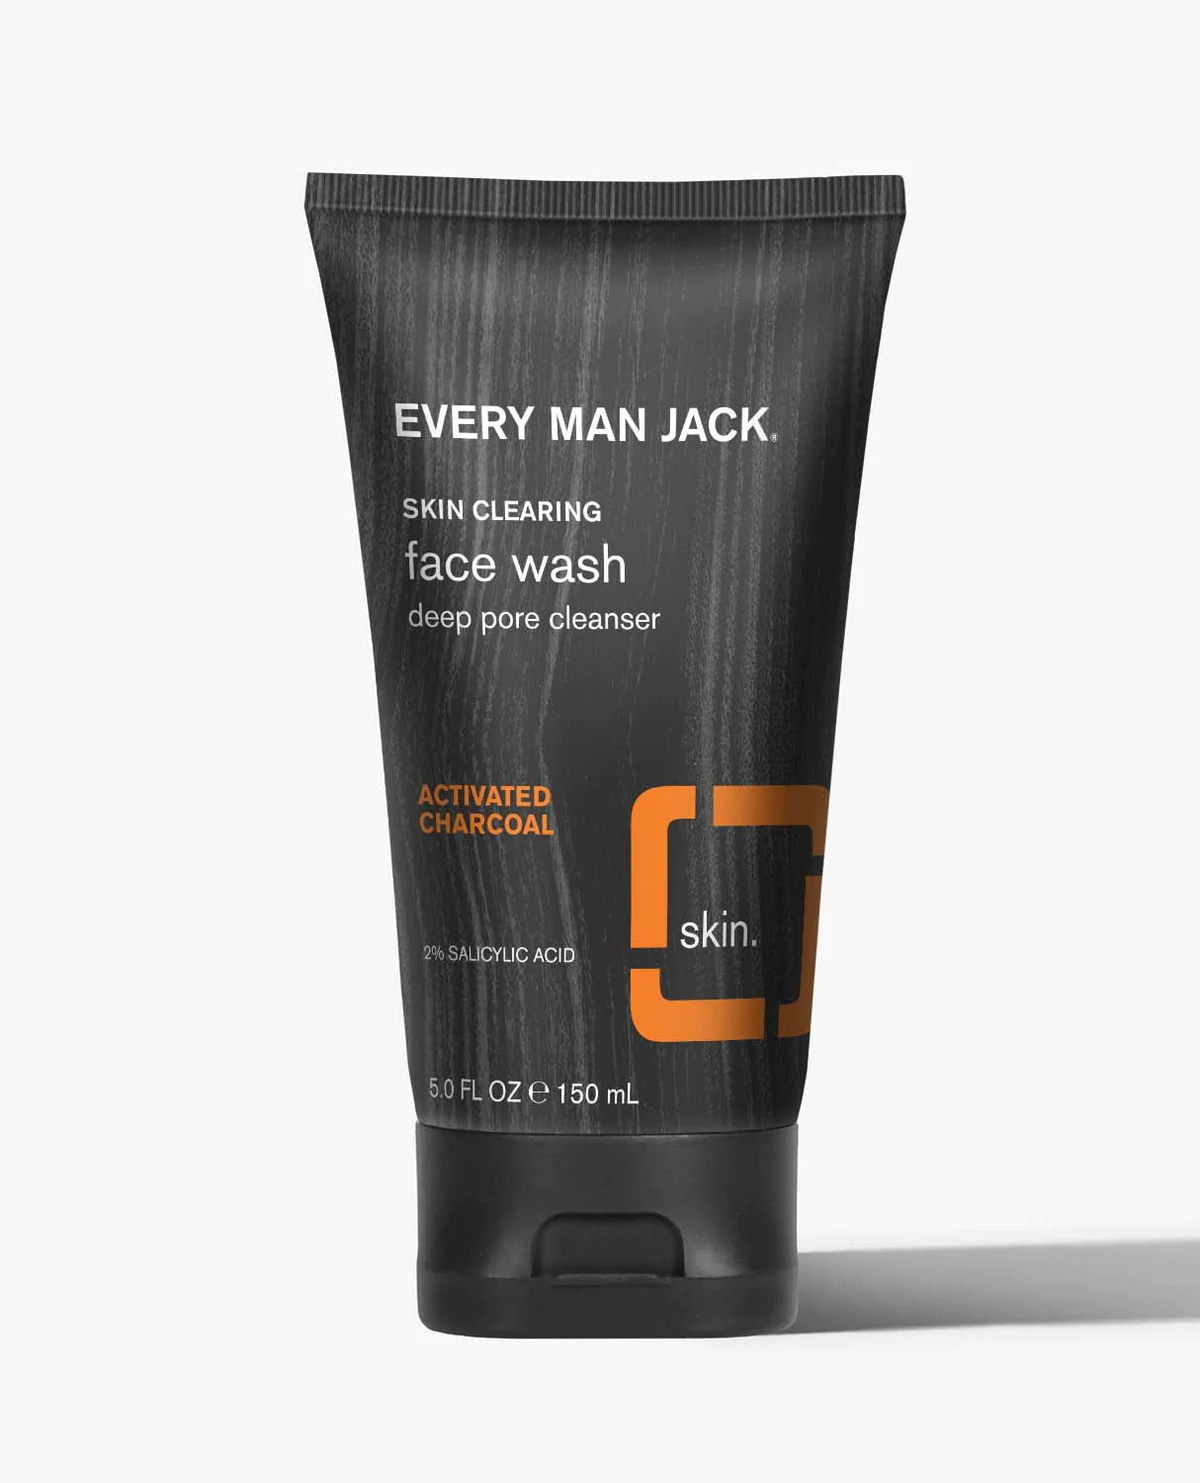 Best Acne Face Washes - Every Man Jack